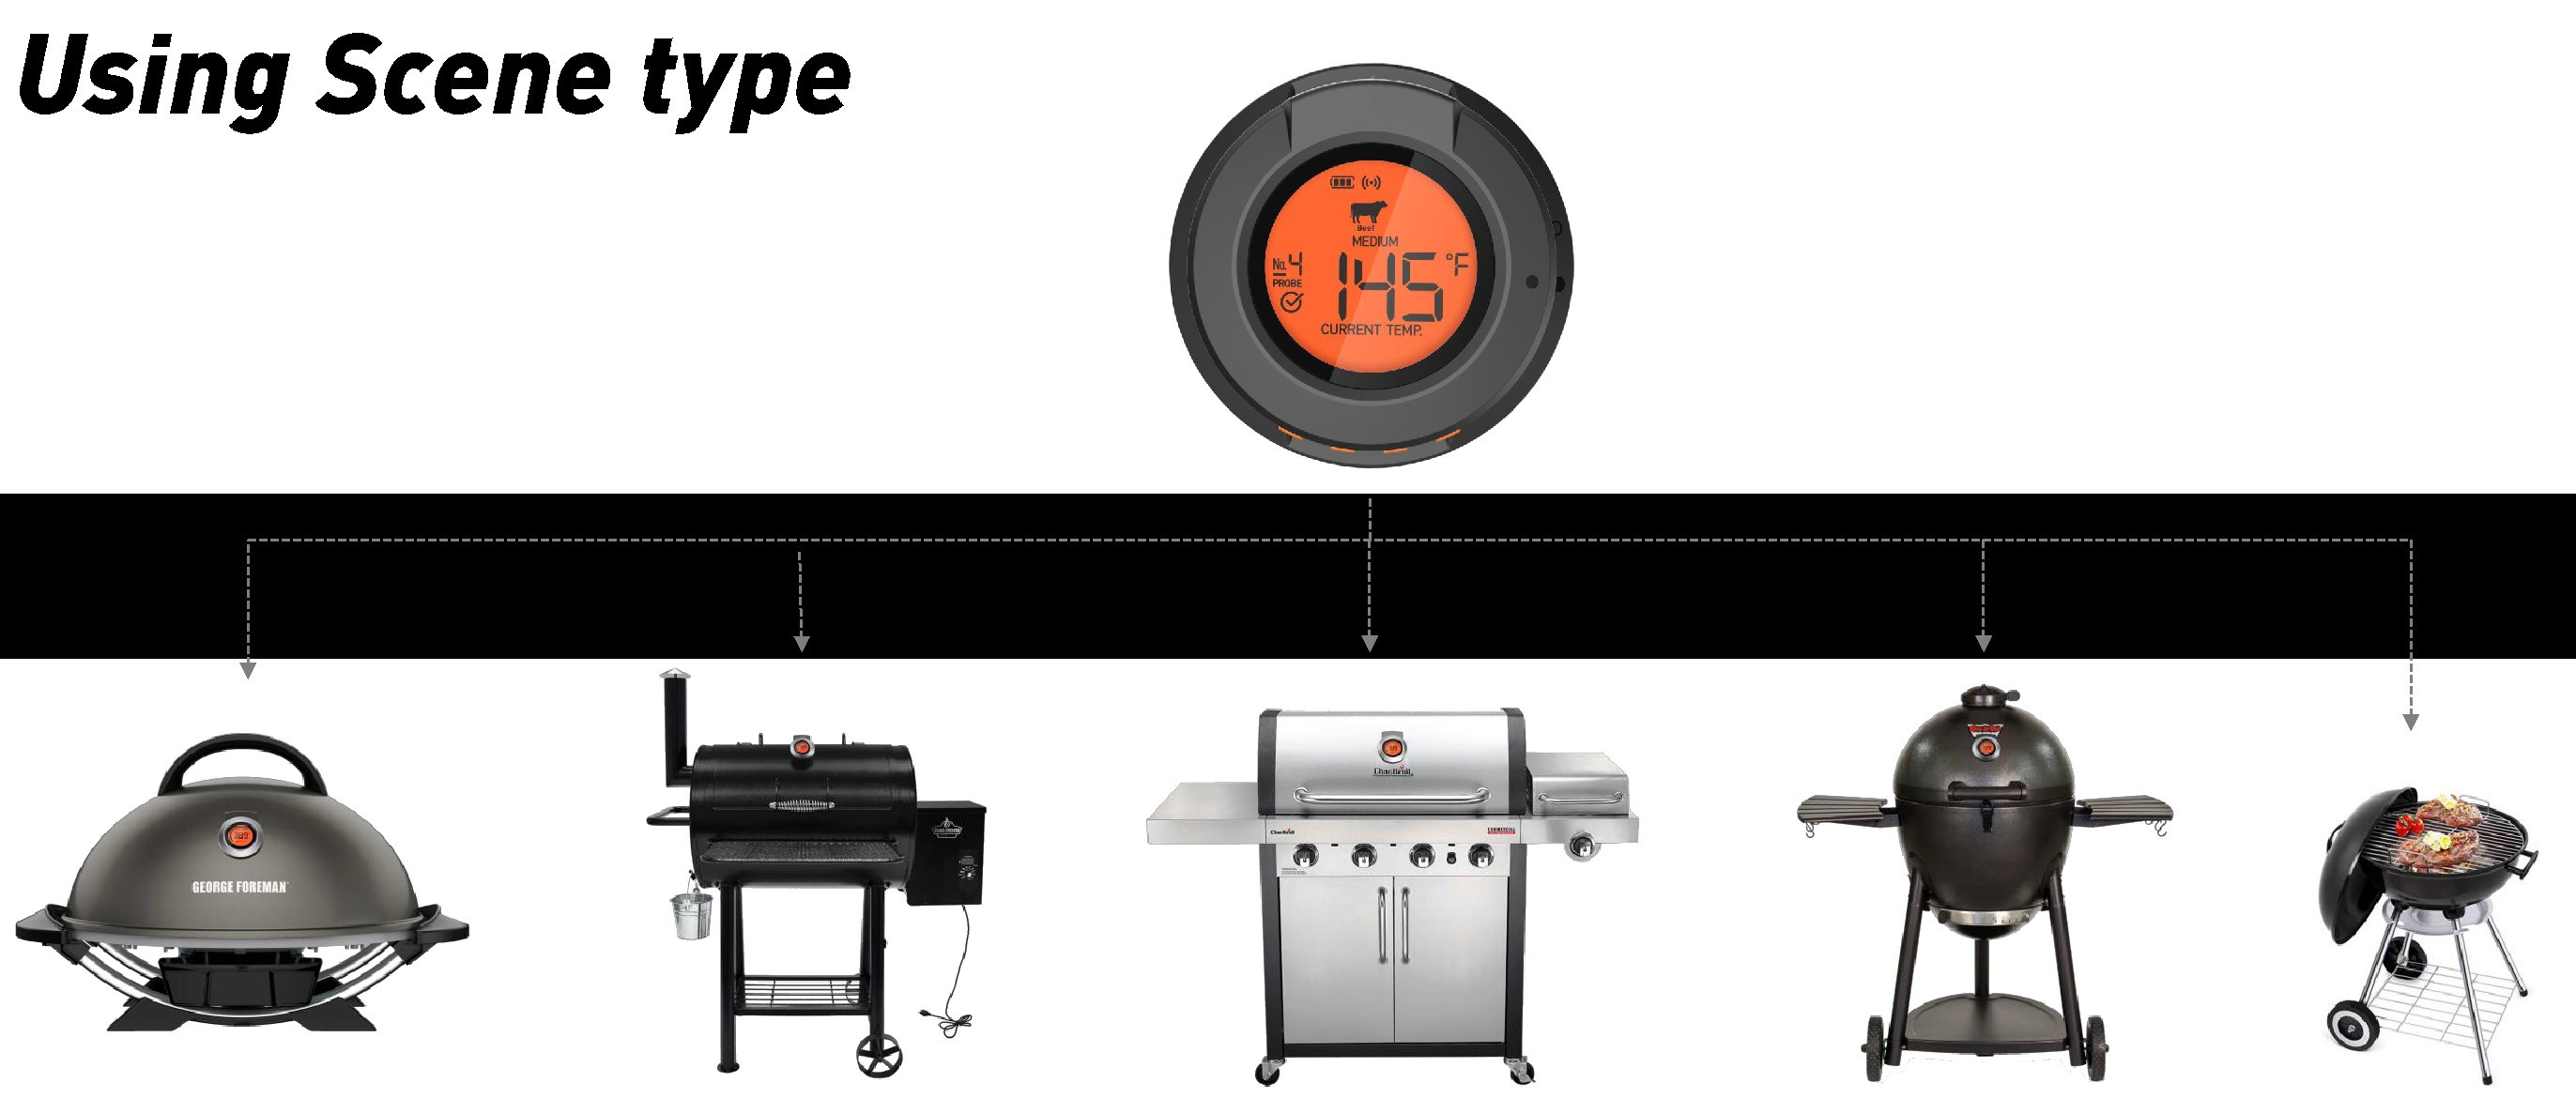 Hyperbbq AT-02 Bluetooth Dome thermometer,smart bluetooth wiress thermometer wtth 4 probes